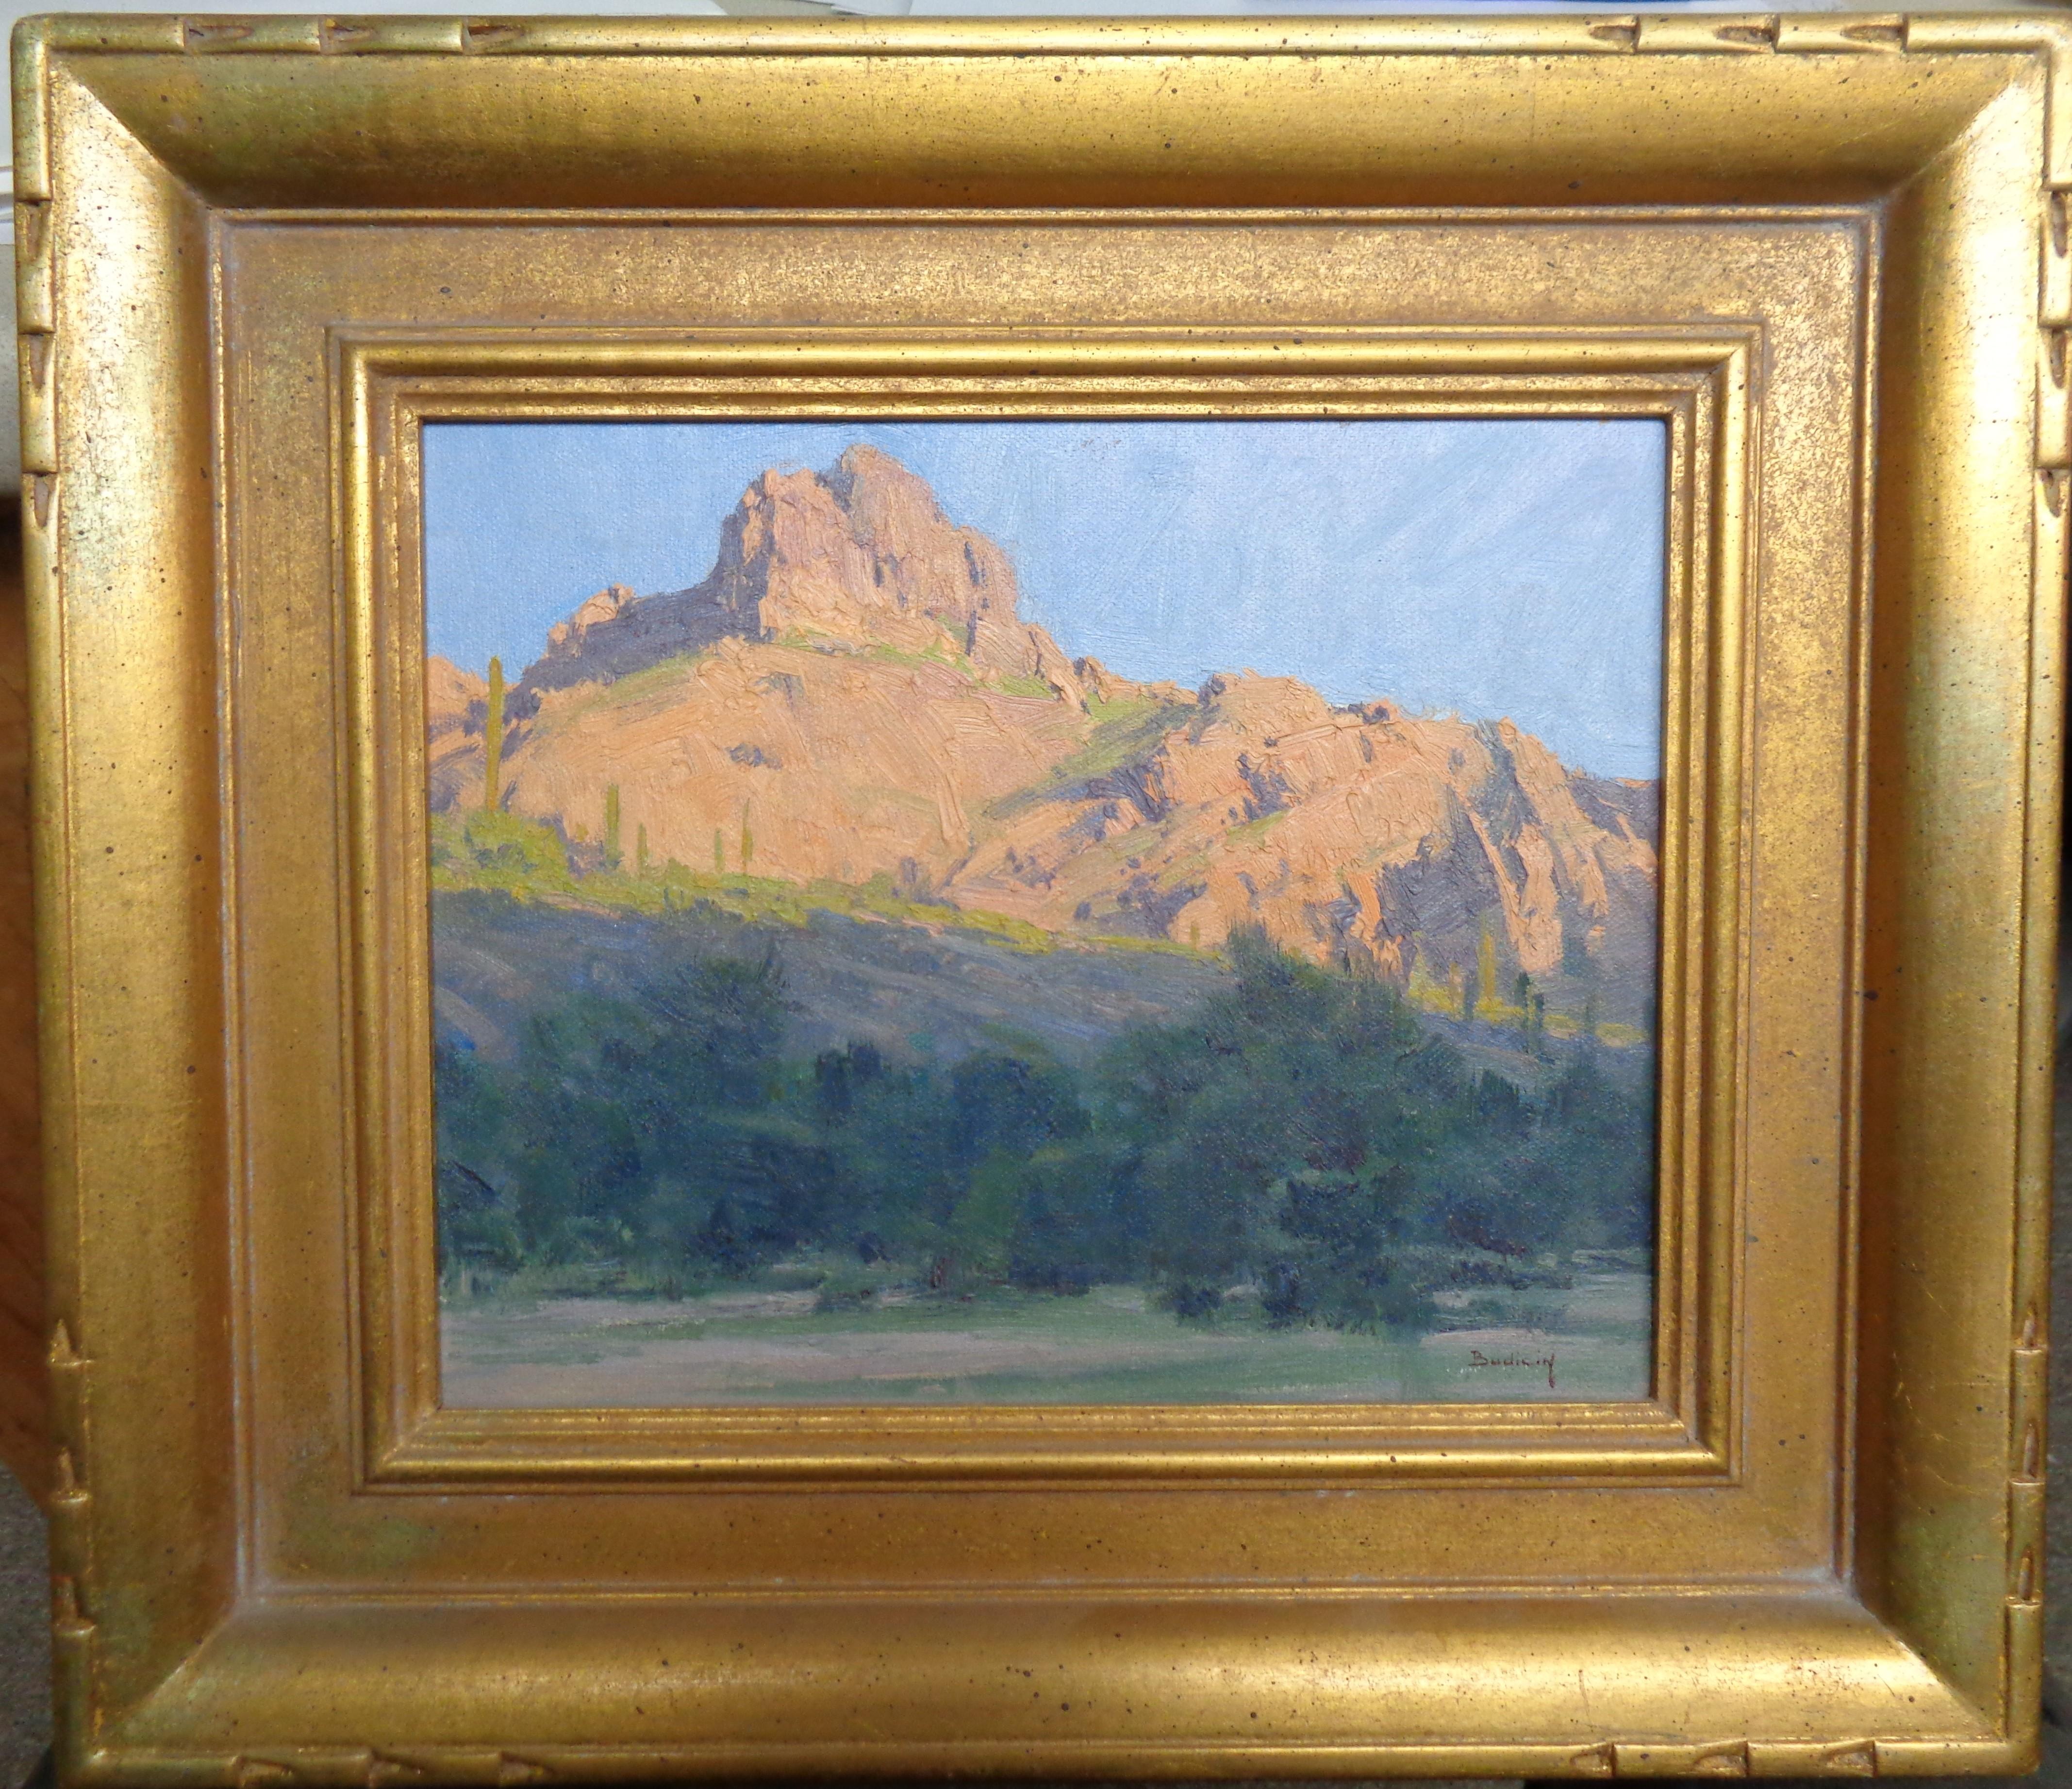 In the Canyon
oil/canvas laid to panel
image 8 x 10
Purchased from the artist in 2003. This is a beautiful plein air painting done in Scottsdale at Bulldog Canyon. This is one of two Budicin painting I have listed here available for purchase.

Born